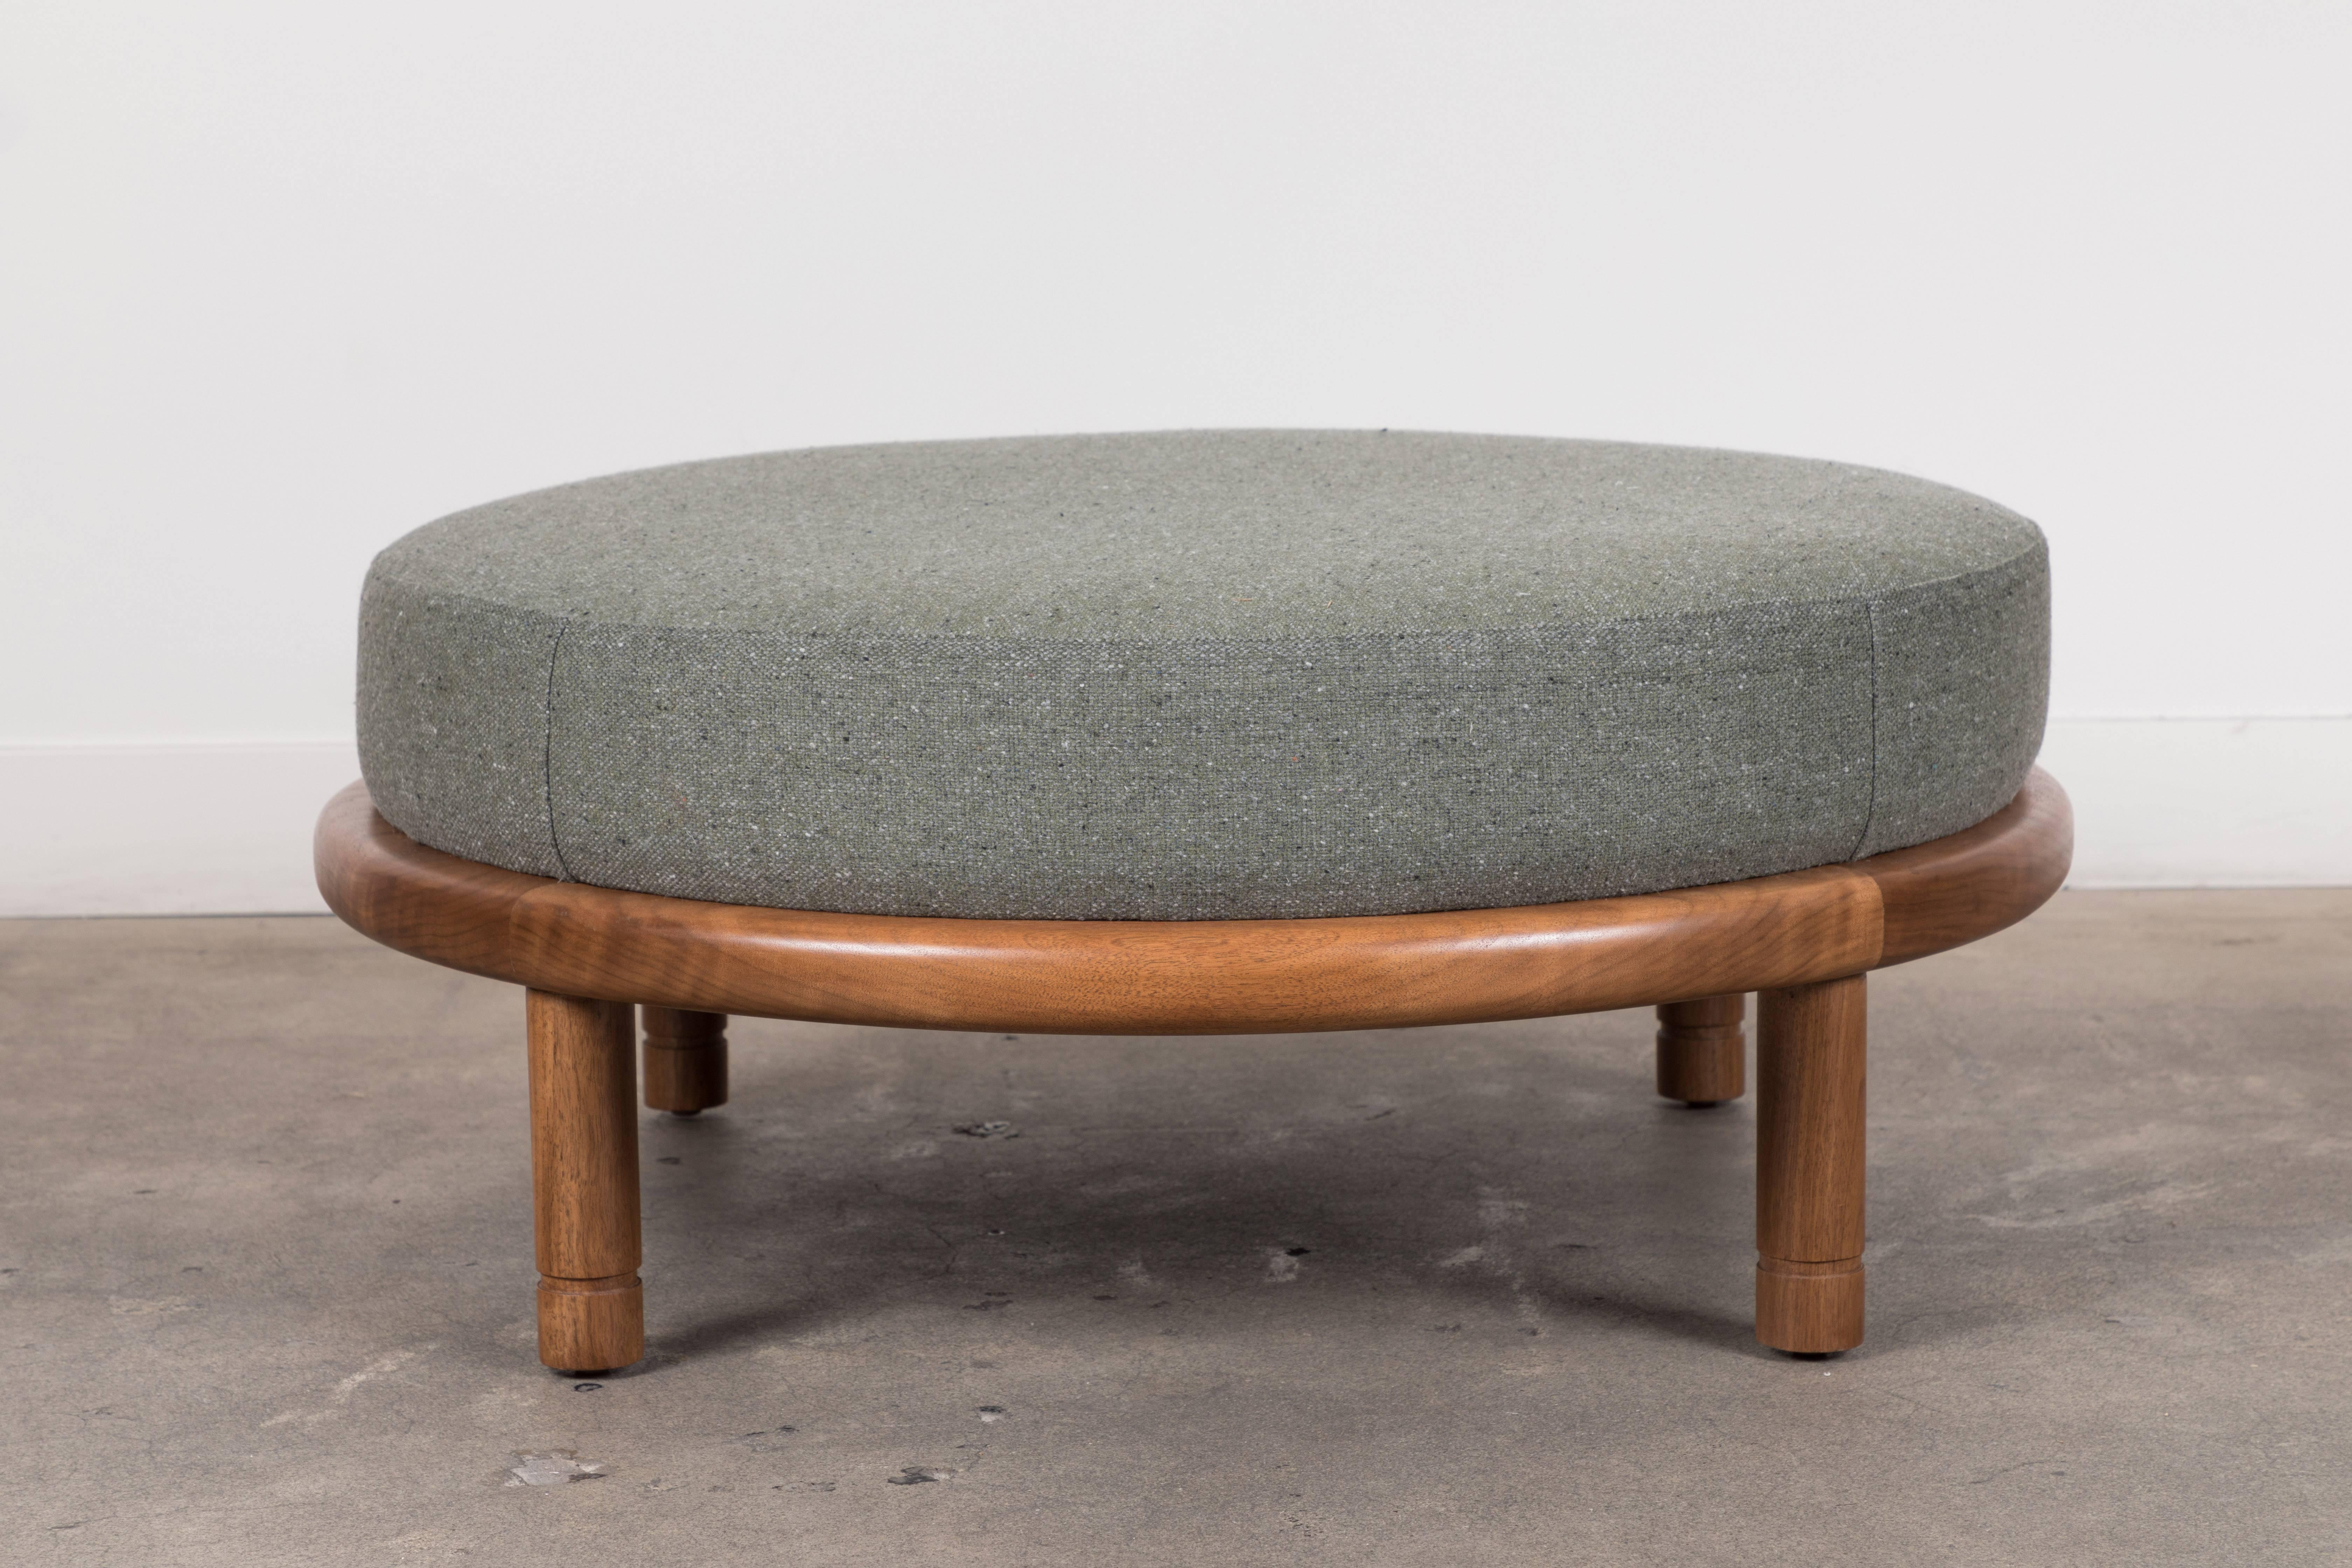 The Moreno Ottoman features a round solid wood base with four cylindrical legs and an upholstered top. Available in American walnut or white oak.

Available to order in Customer's Own Material with a 6-8 week lead time.

As Shown: $1,775
To Order: